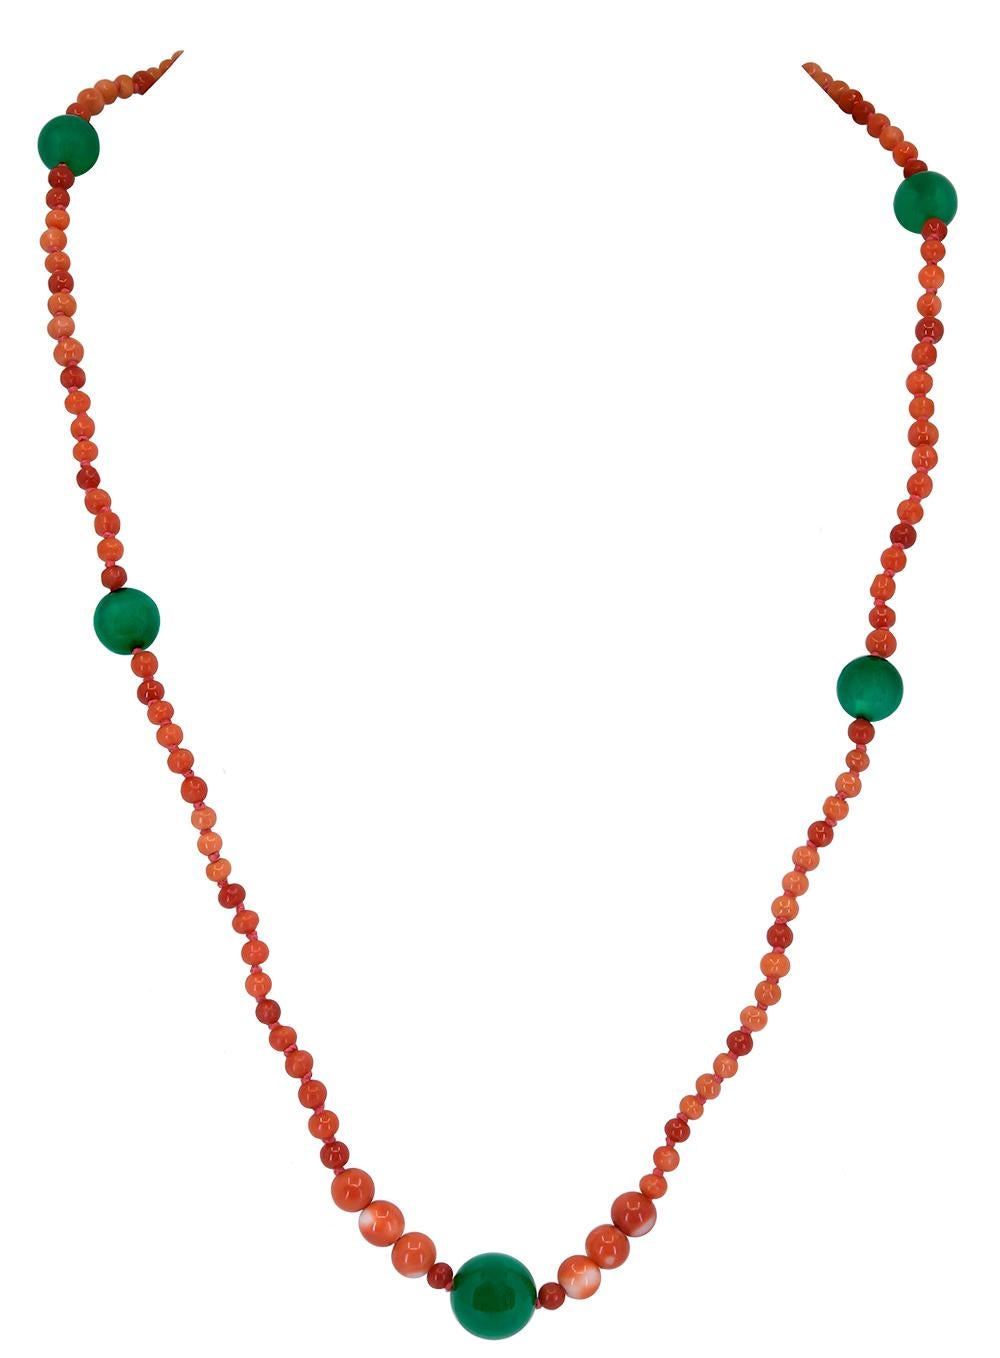 green and red beads necklace